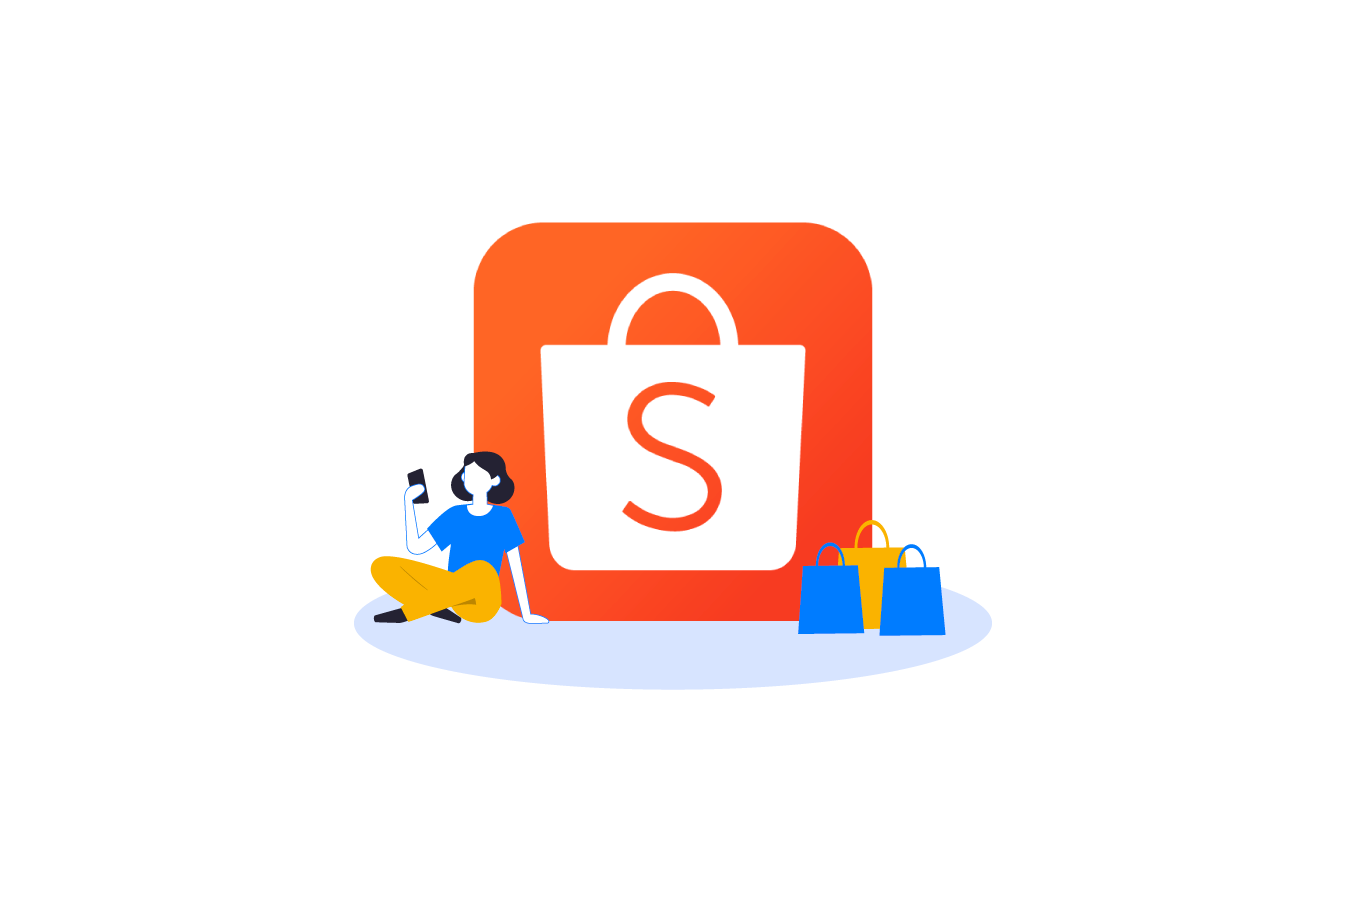 Shopee Sale Tips 101: Make the Most Out of Every Big Sale